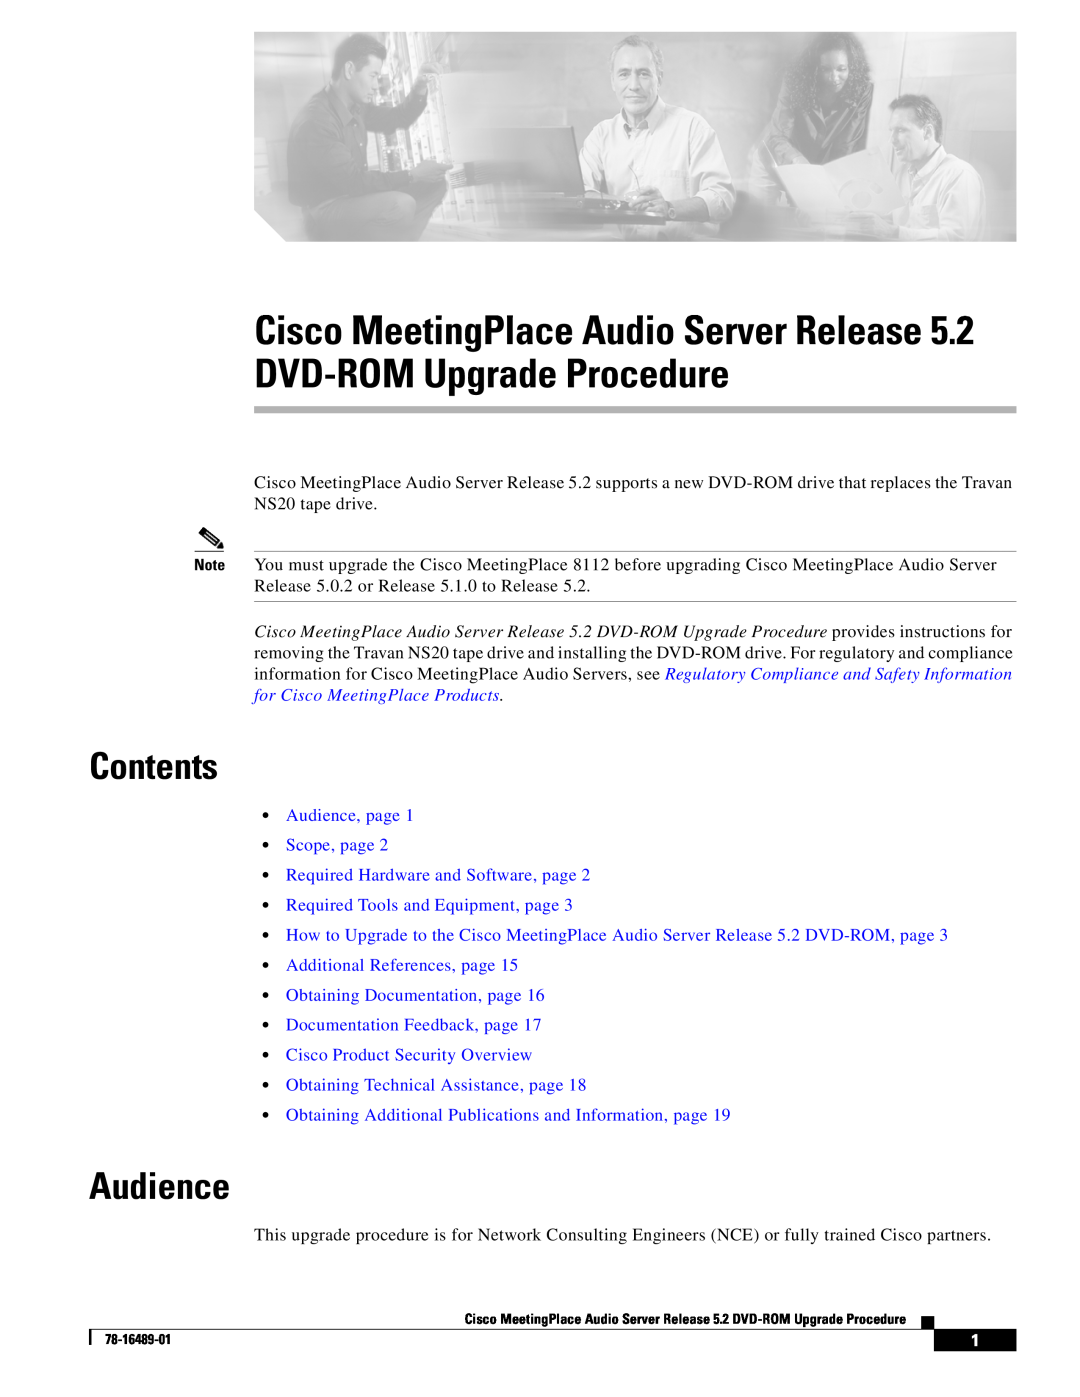 Cisco Systems DVD-ROM manual Contents, Audience, page Scope, page Required Hardware and Software, page 